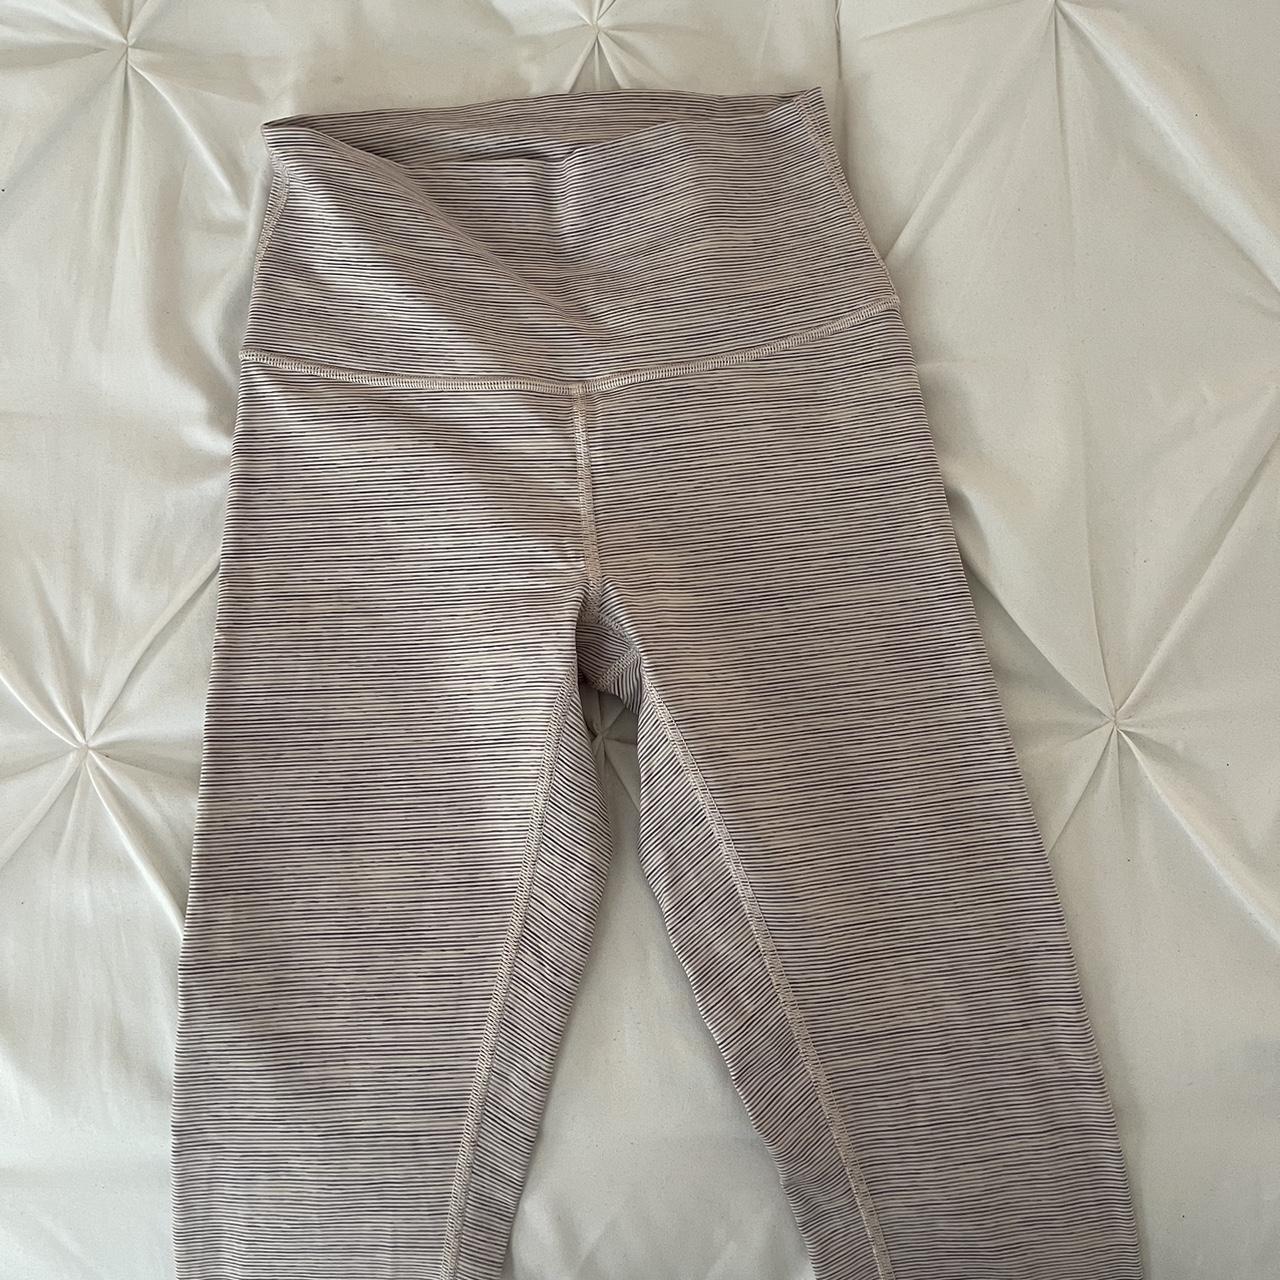 Space Silver Just Strong Leggings